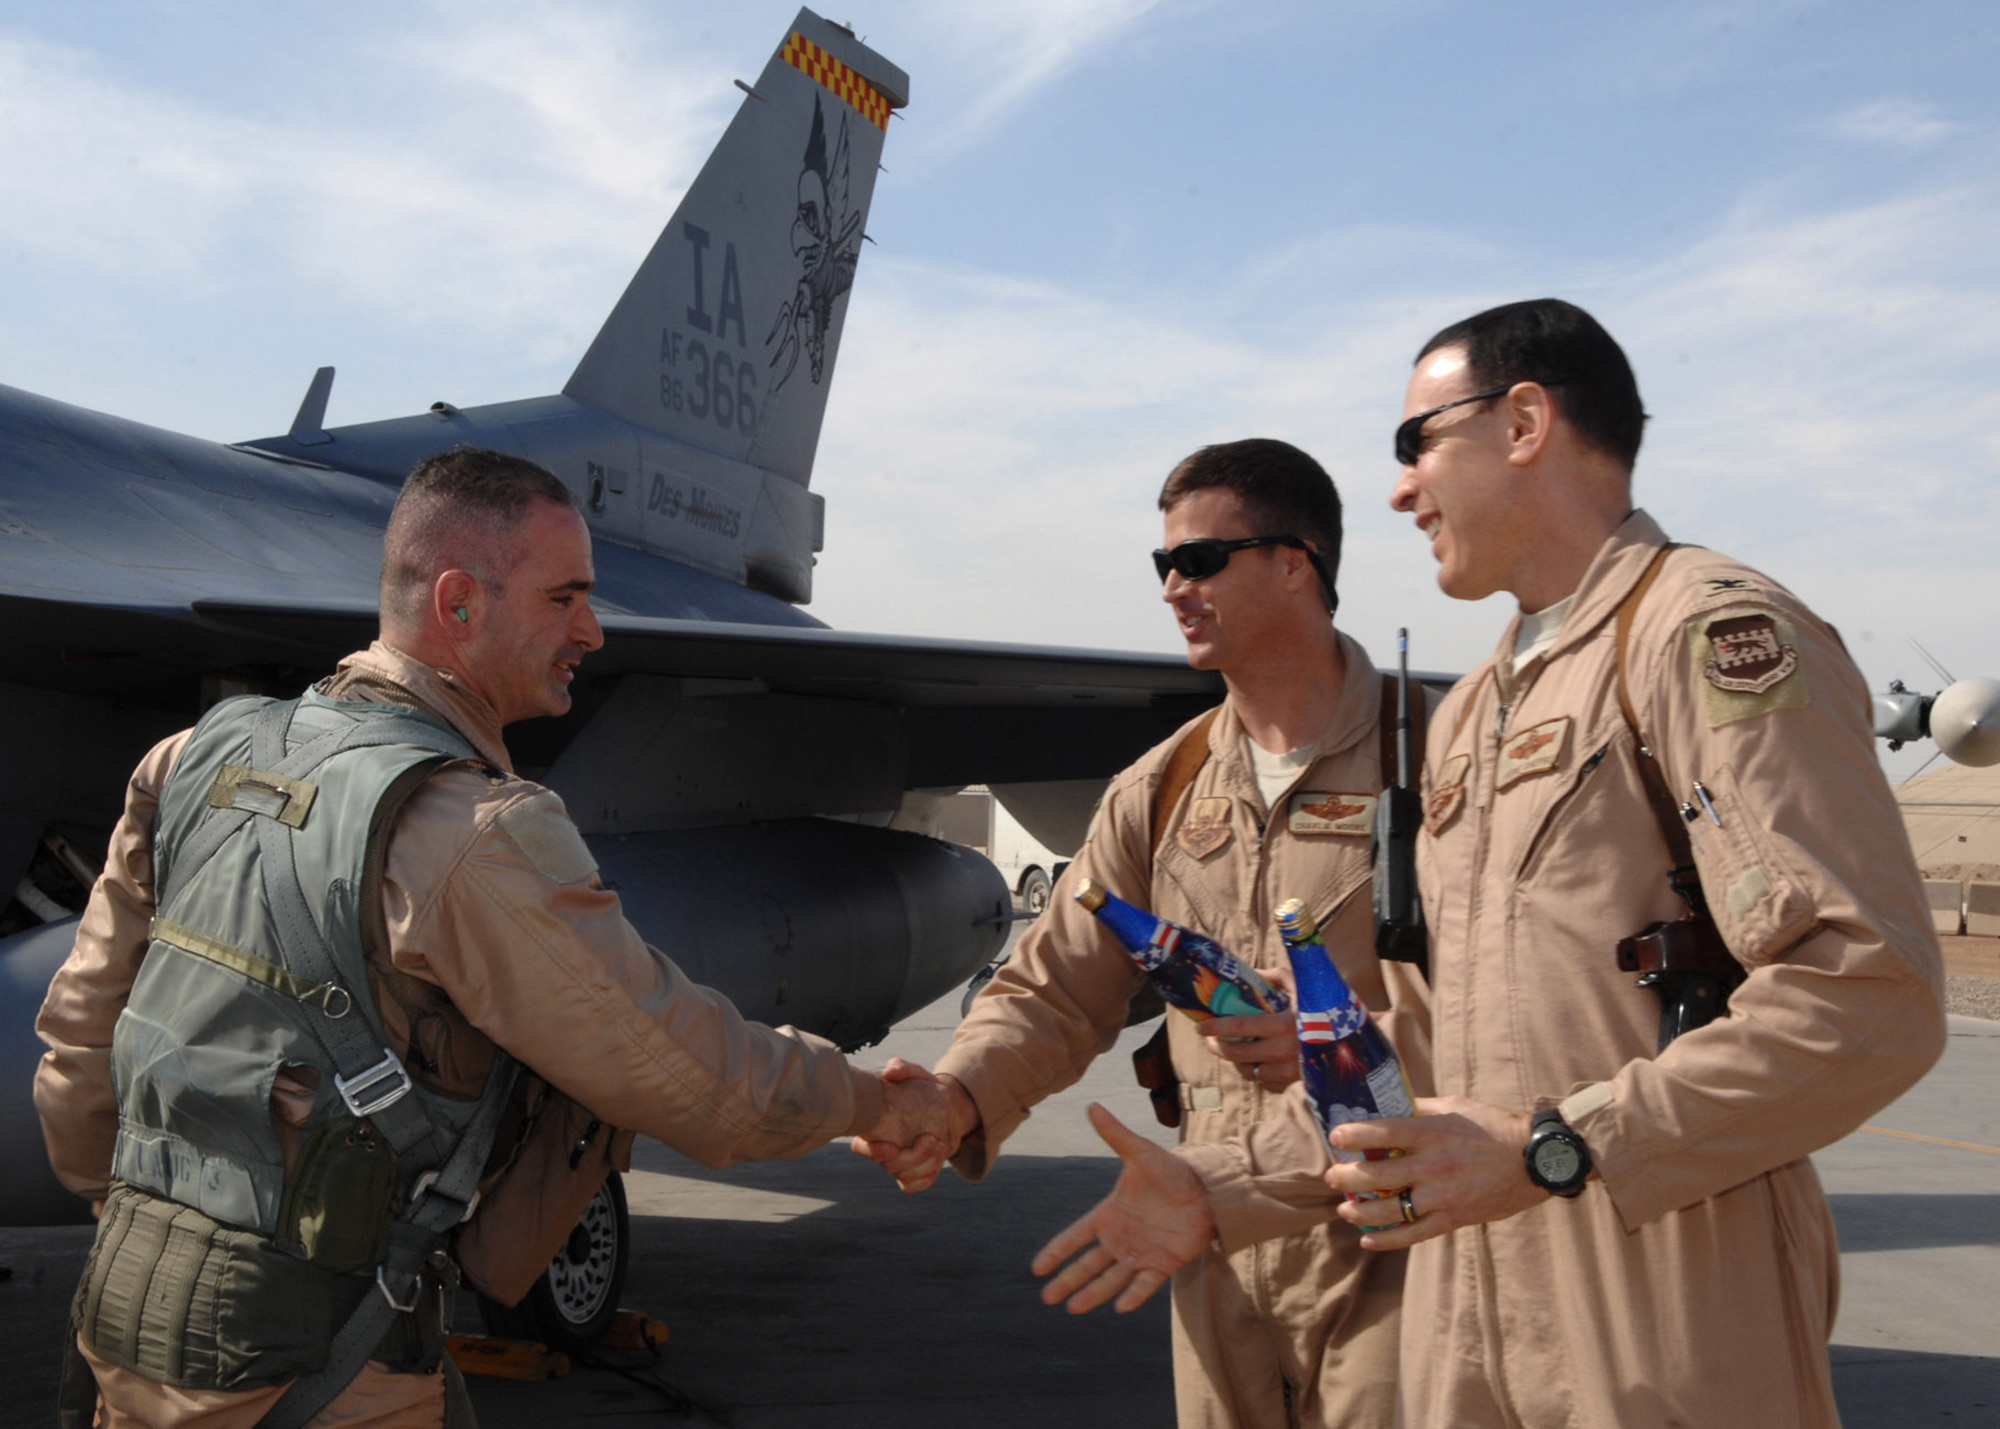 Lt. Col. George Uribe is greeted and congratulated by Col. Steven Shepro and Col. Charles Moore after completing 1,000 combat flying hours as an F-16 Fighting Falcon pilot Feb. 17 at Balad Air Base, Iraq. Colonel Uribe is a 332nd Expeditionary Operations Group fighter pilot and deployed from Tyndall Air Force Base, Fla. Colonel Shepro is the 332nd Air Expeditionary Wing vice commander, and Colonel Moore is the 332nd Expeditionary Operations Group commander. (U.S. Air Force photo/Senior Airman Julianne Showalter) 
